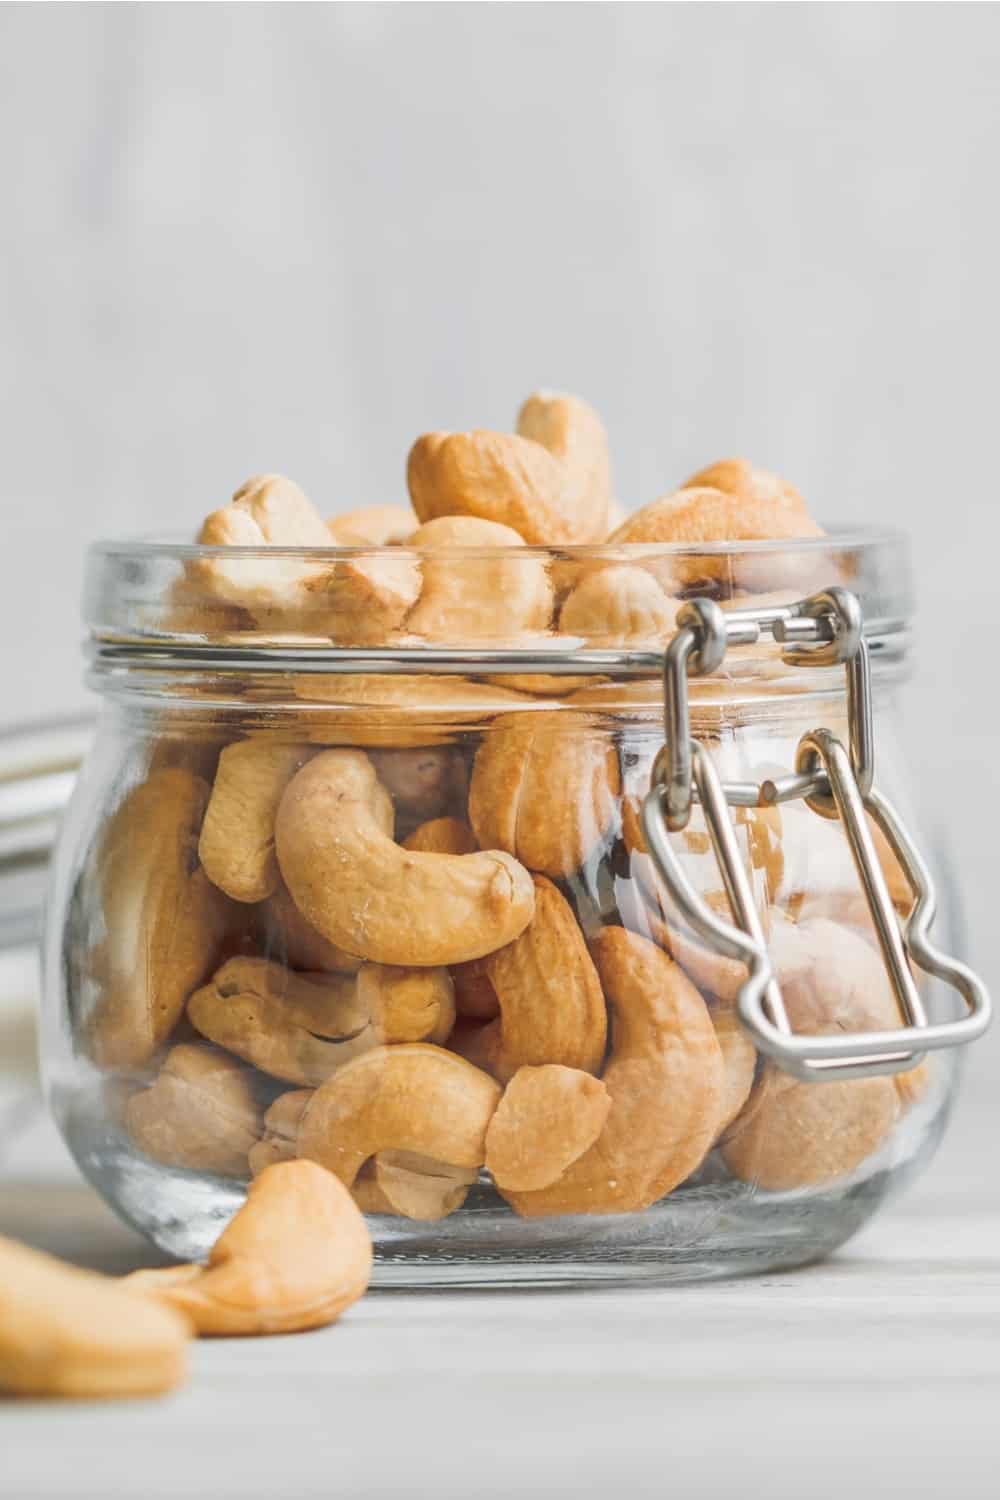 The Risk of Consuming Expired Cashews